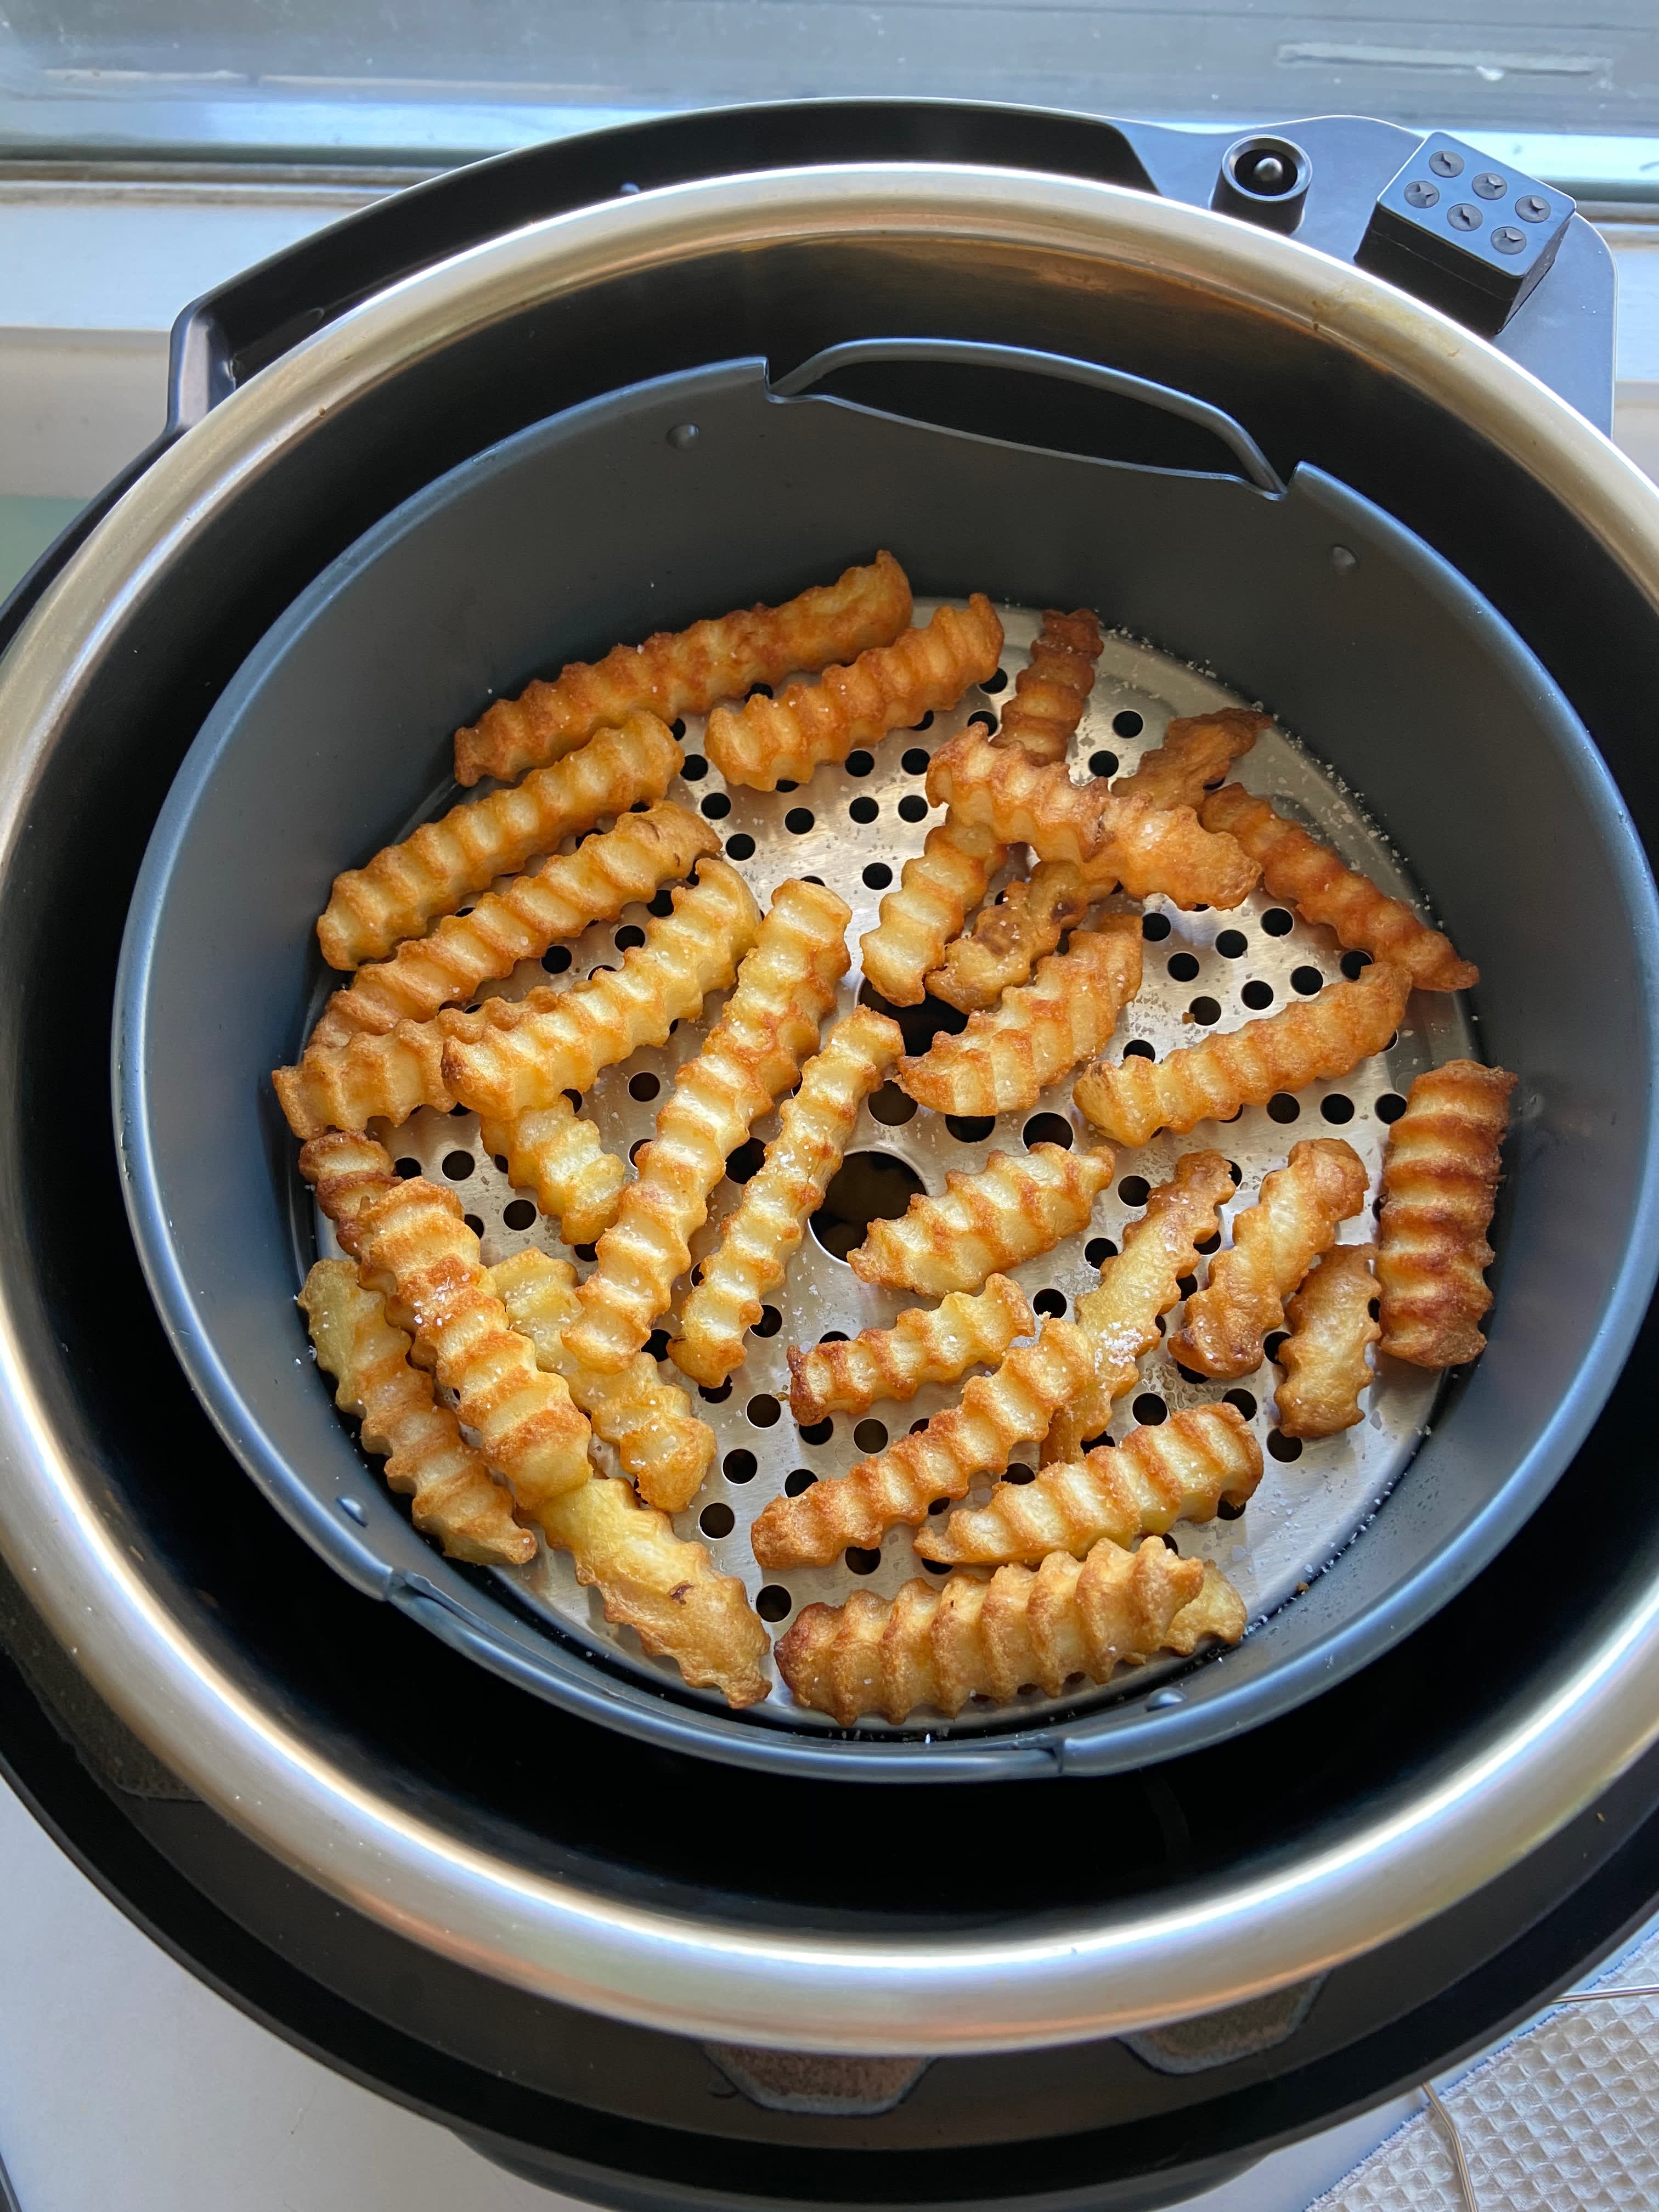 The Instant Pot Air Fryer Lid works as promised, but only for small batches